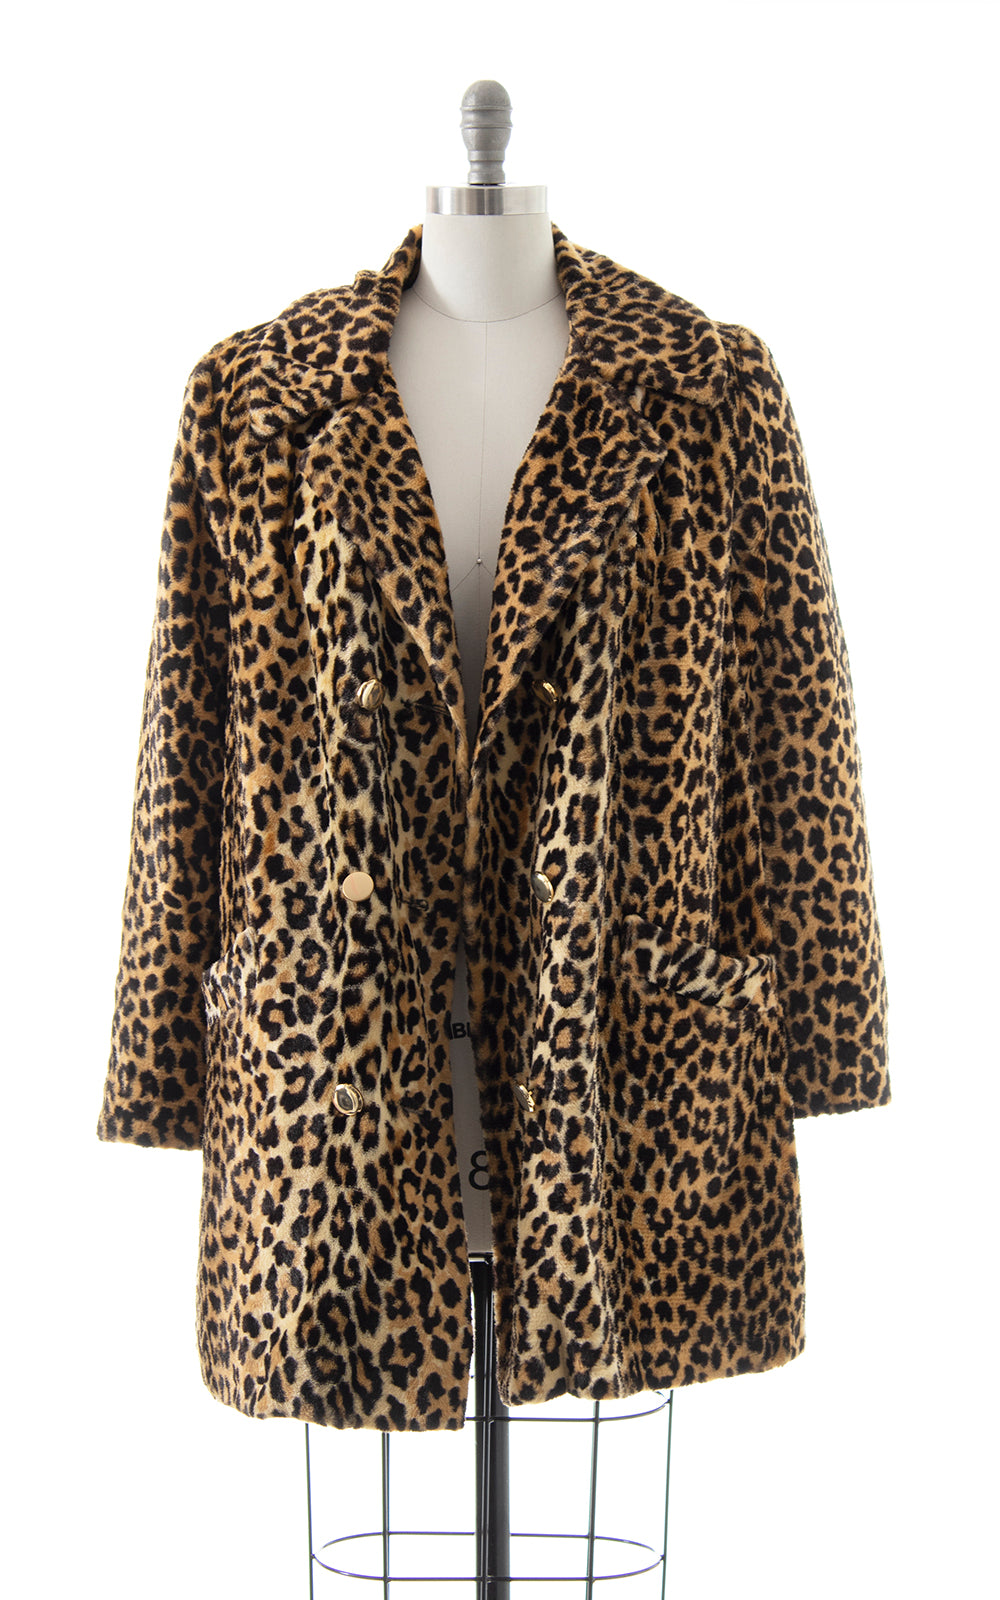 1960s 1970s Leopard Print Faux Fur Coat with Quilted Lining ...